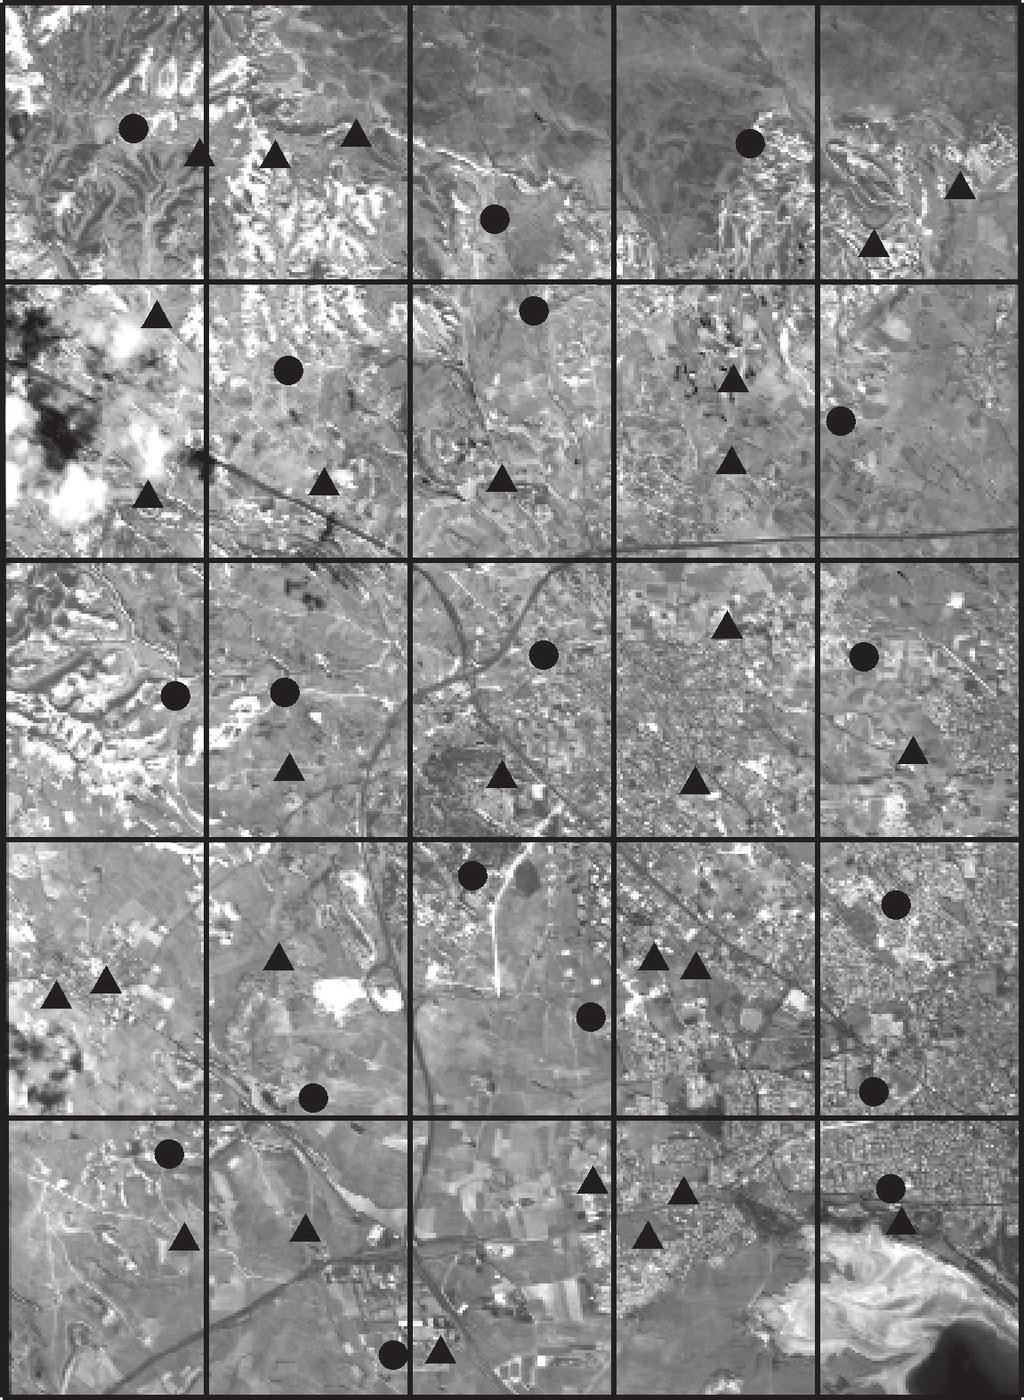 thorectified VHR Space Image Data and Kyriacos Alexandrou acquired a QuickBird image with the characteristics shown in Table 1; we also received an IKOOS image of the same scene for comparison.